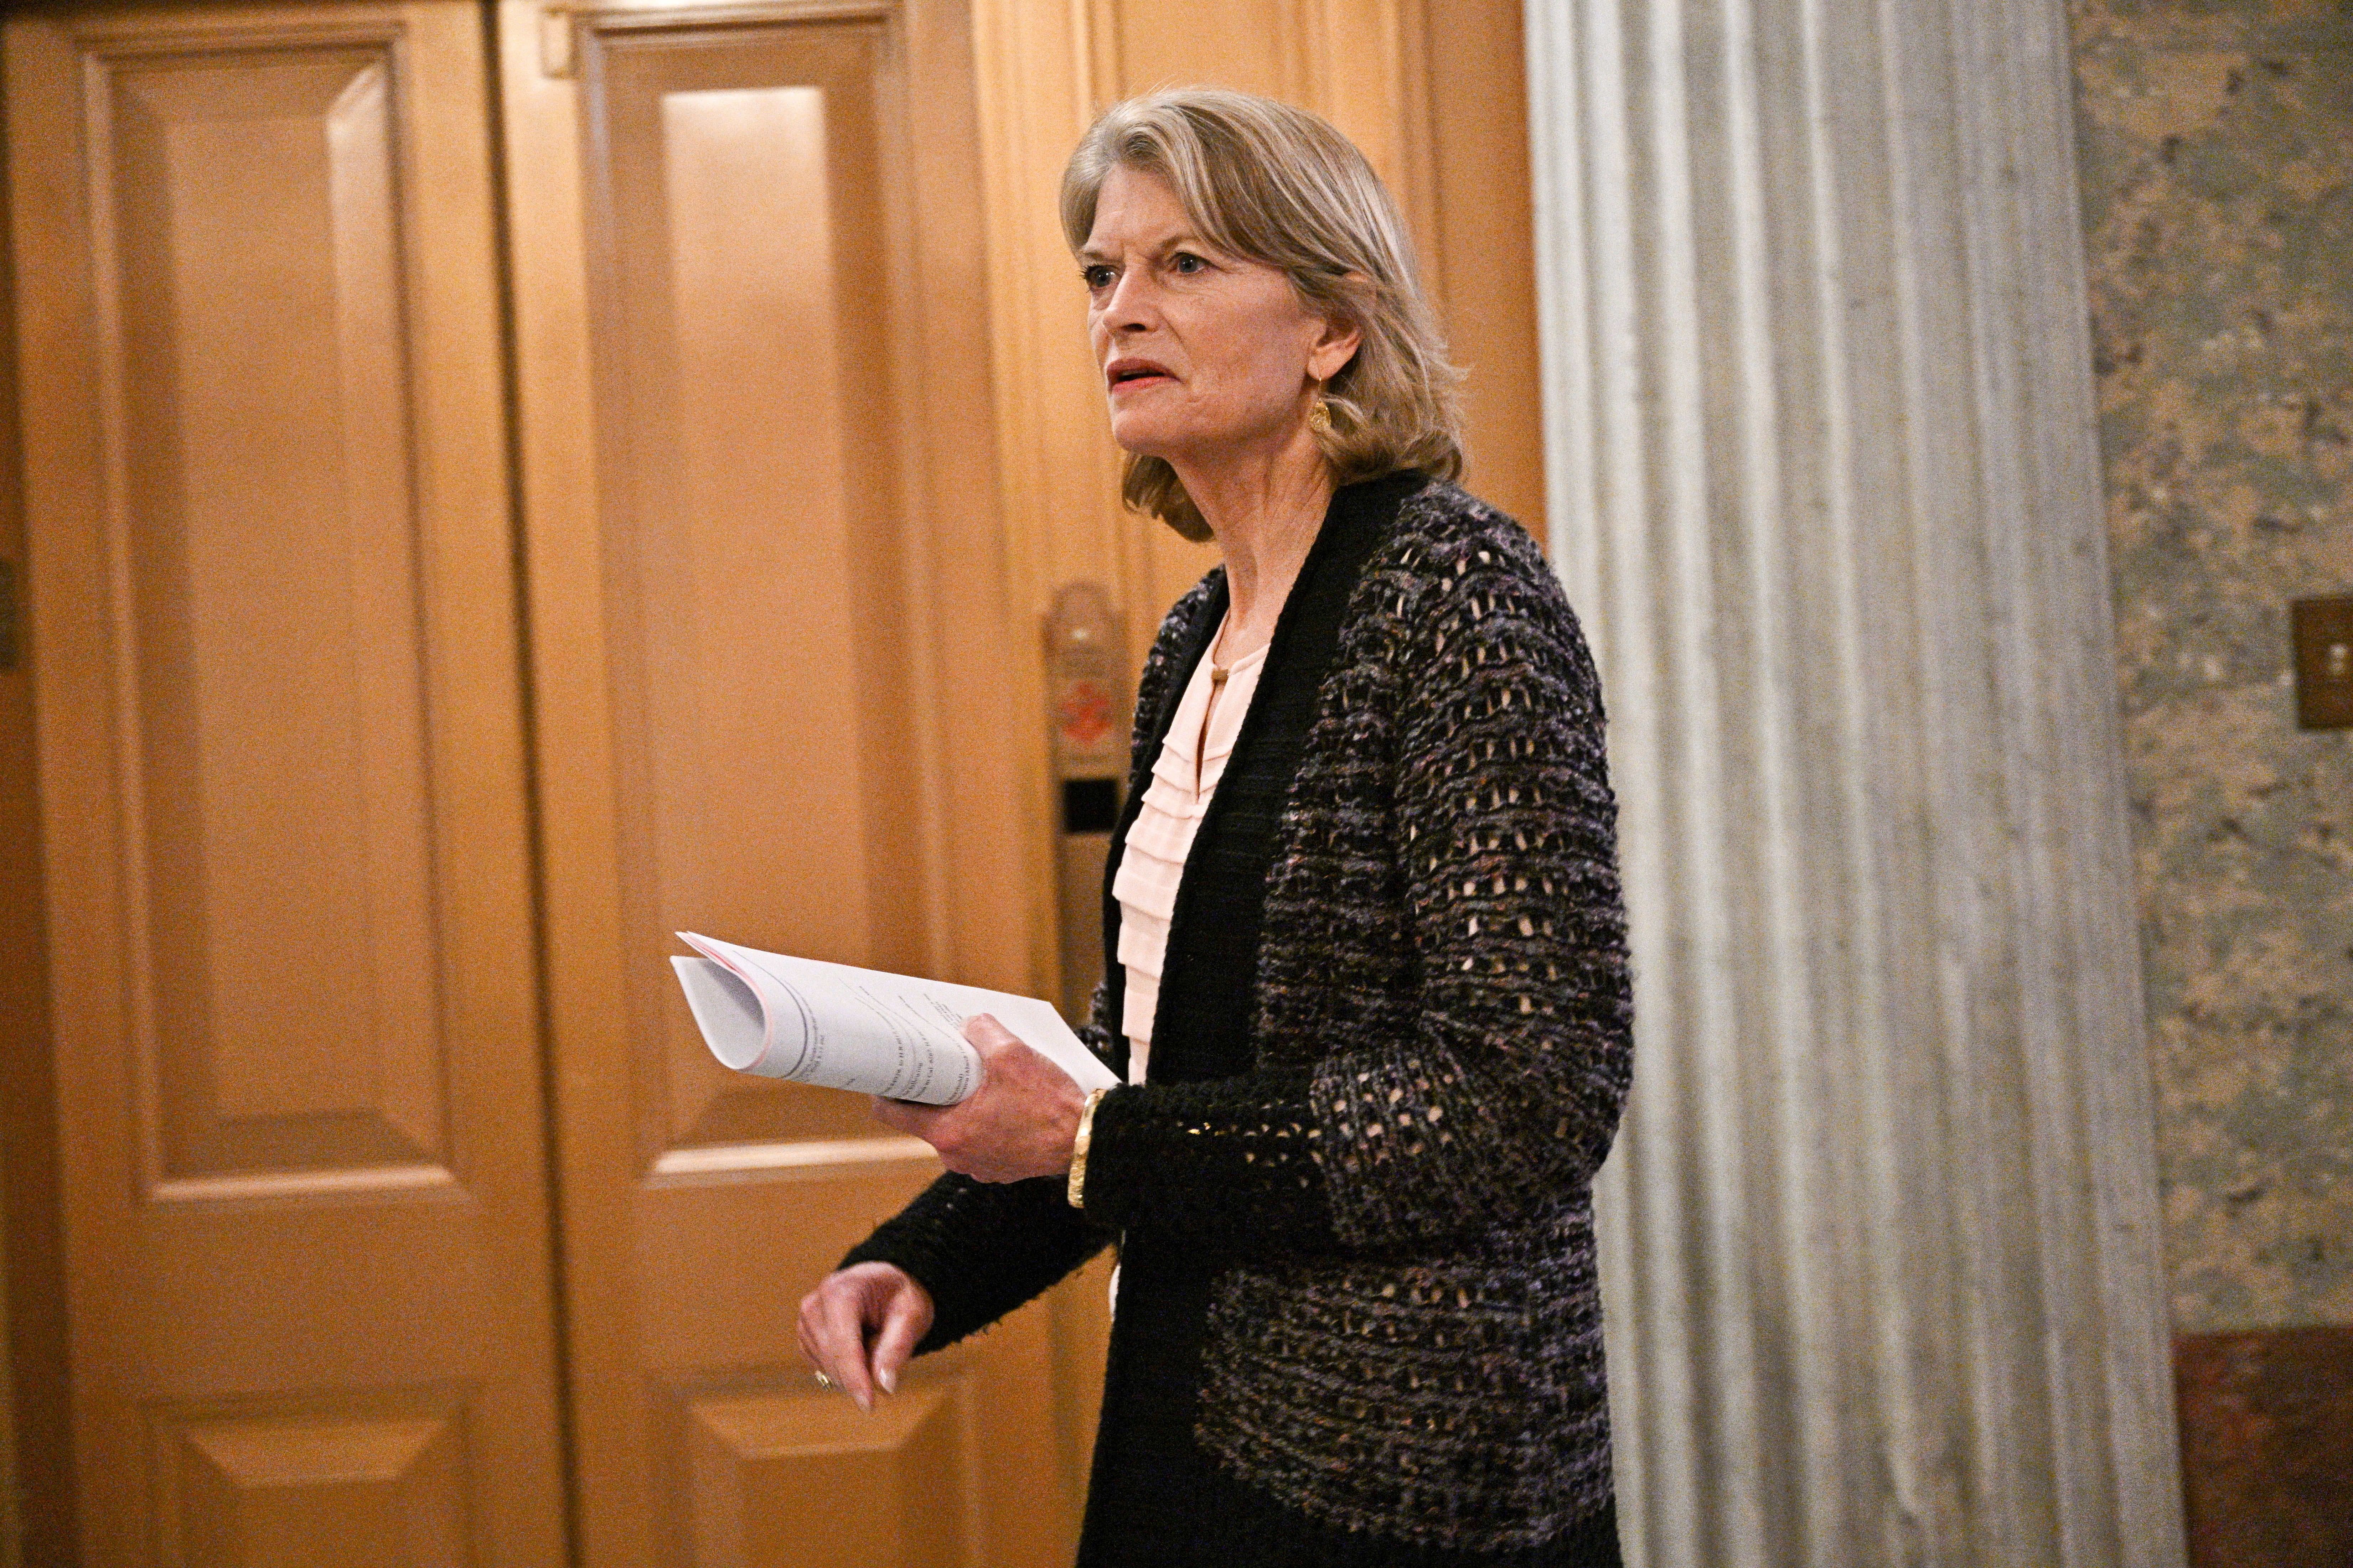 U.S. Senator Lisa Murkowski (R-AK) arrives to vote on an amendment to the Continuing Resolution that averted a shutdown of the federal government, at the U.S. Capitol in Washington